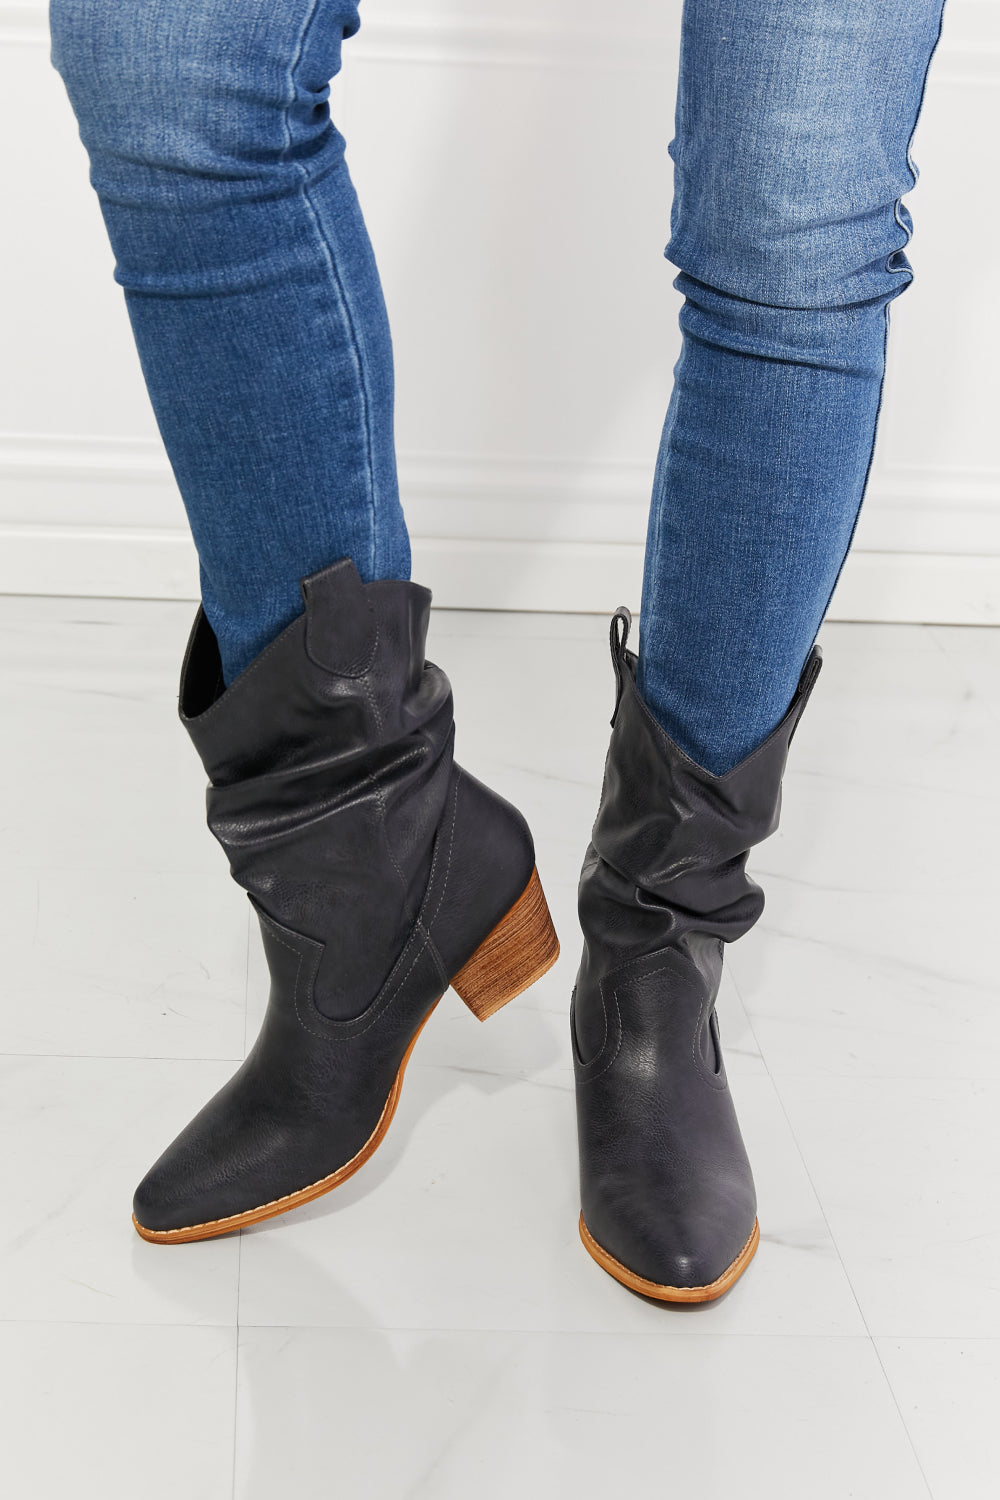 The Navy Scrunchie Boot